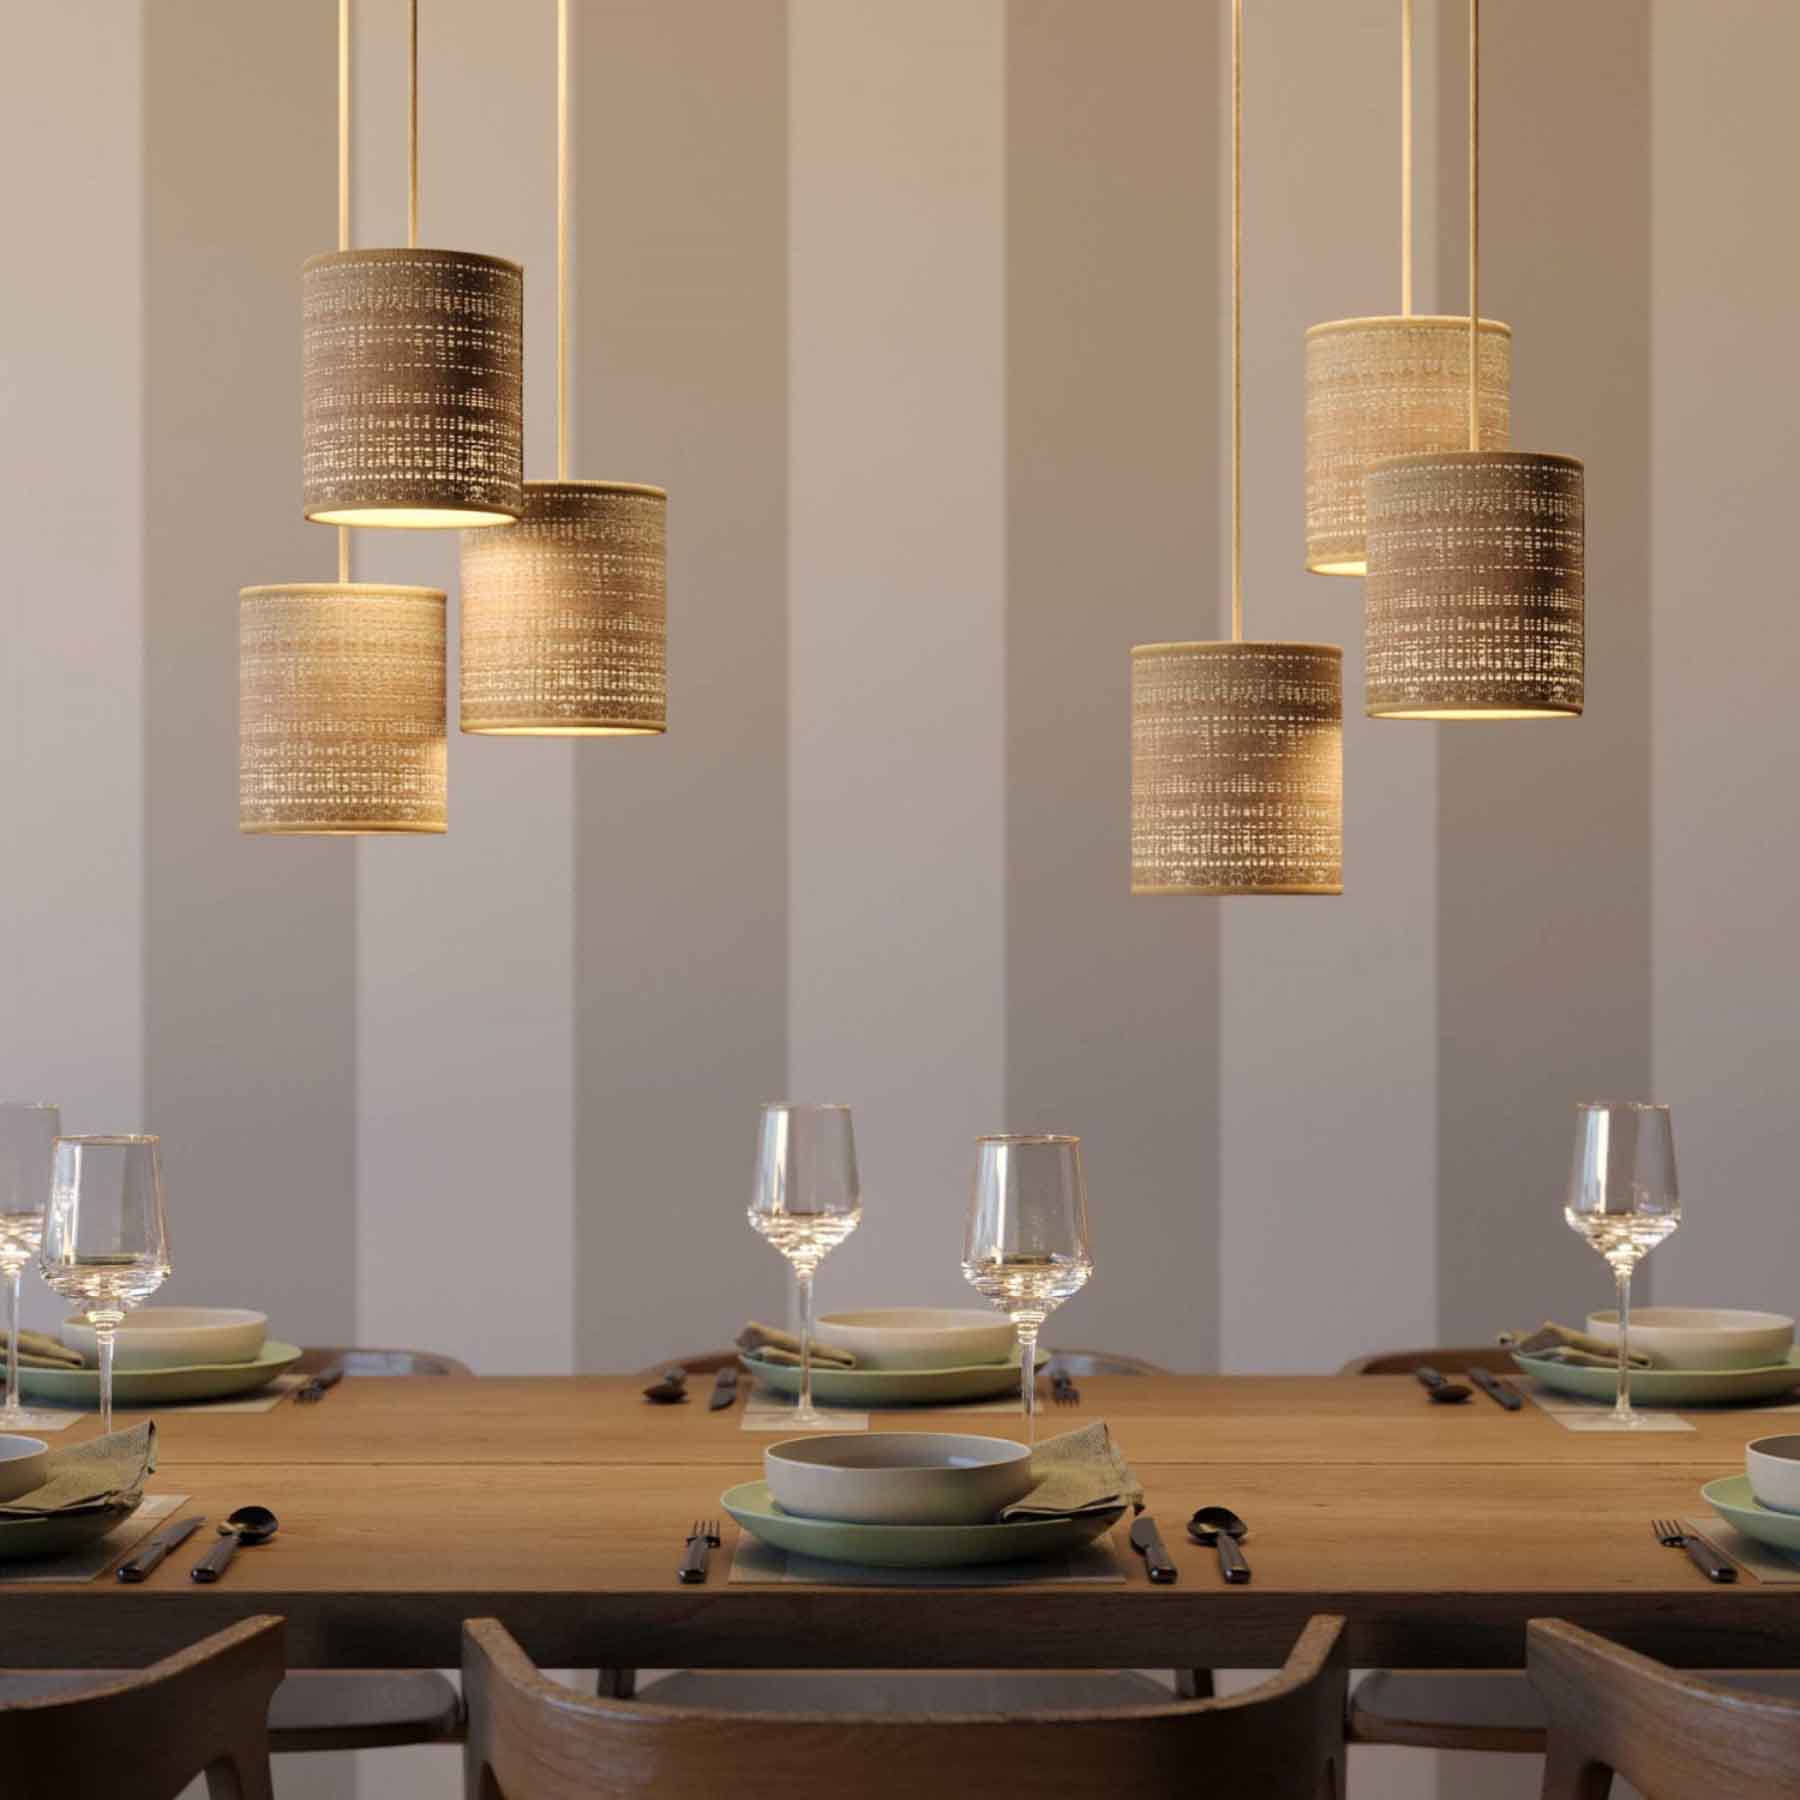 famous scandinavian rattan pendant lights add a sense of warmth and natural texture to a space enhancing serenity